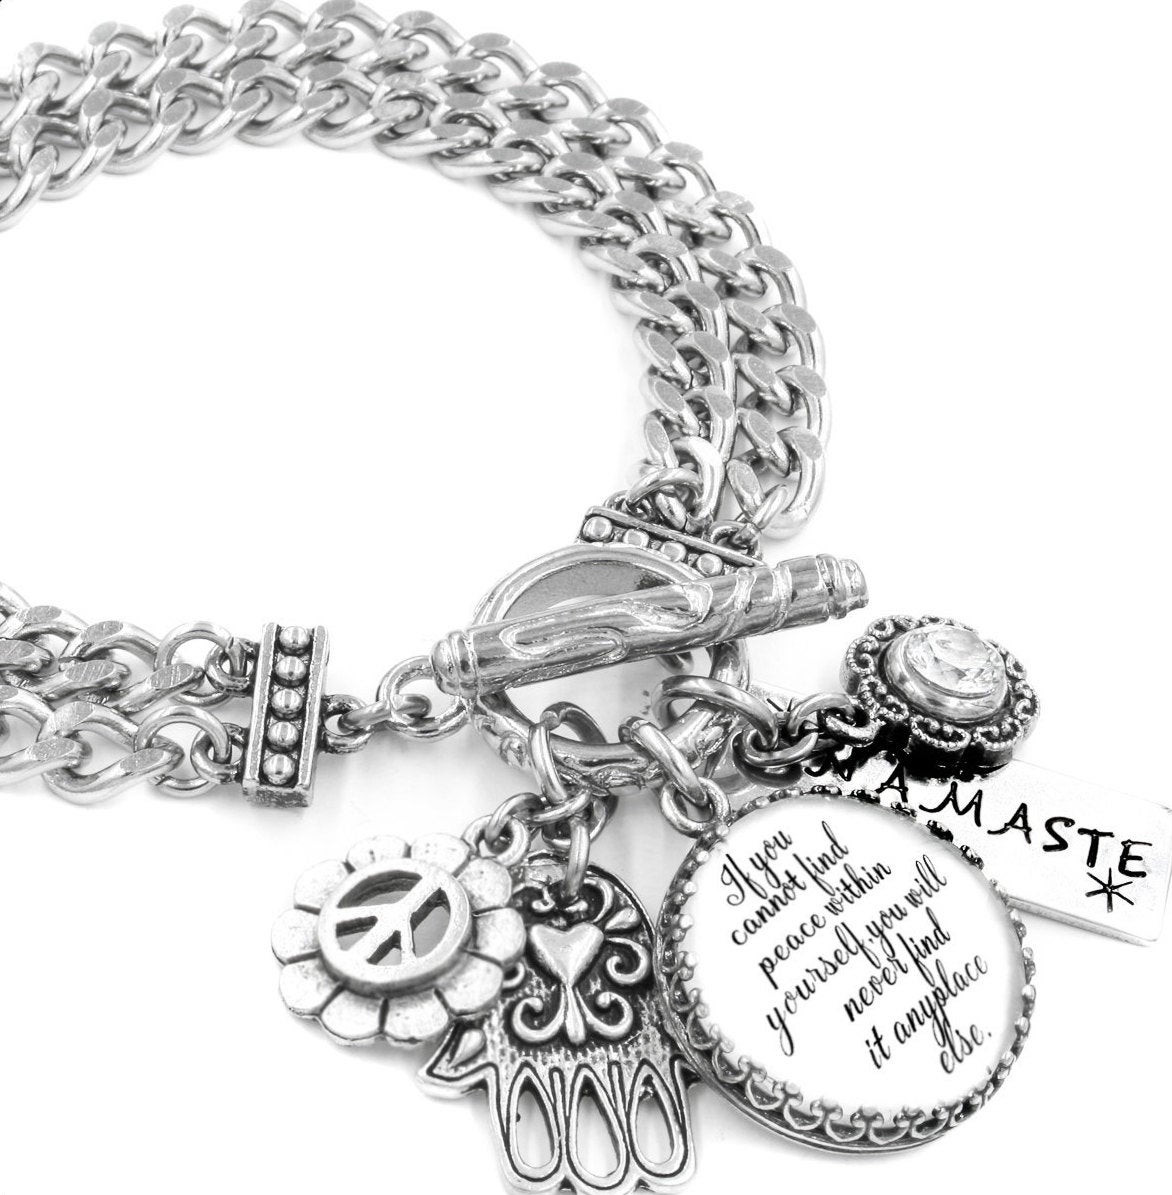 Inspirational Quotes Jewellery
 Inspirational Bracelet Silver Inspirational Quote Jewelry